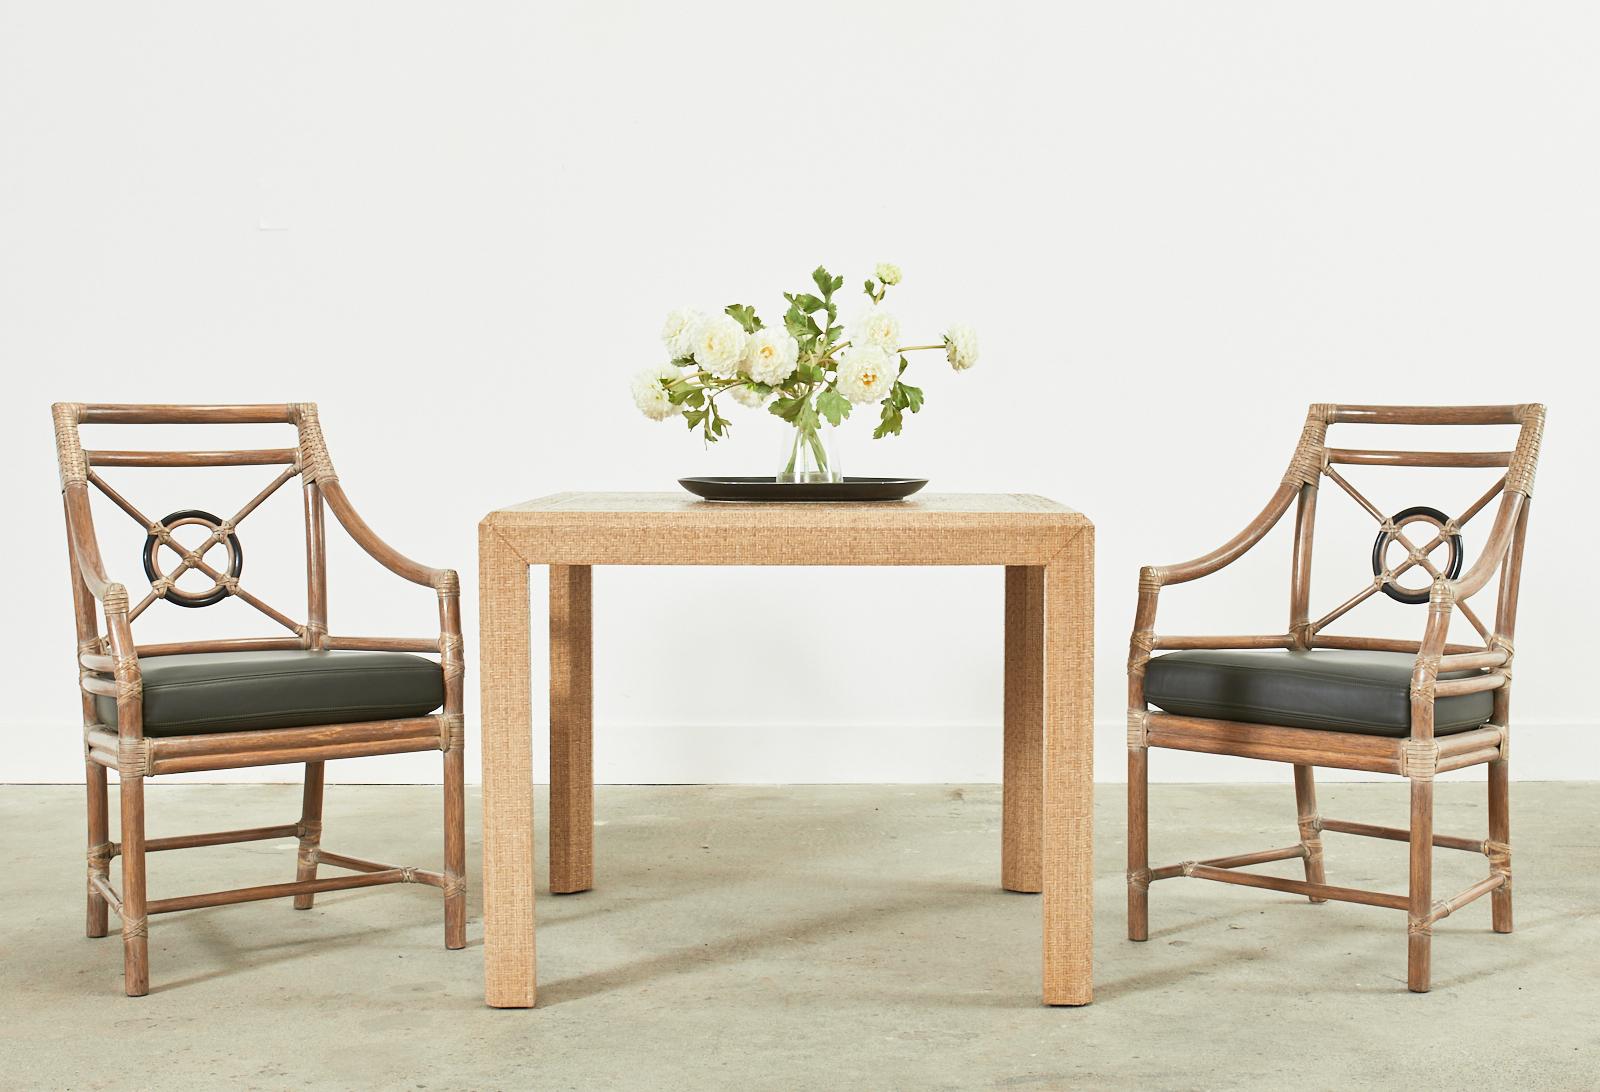 Stylish square dining table or breakfast table featuring a lacquered raffia grasscloth clad frame. Made in the style and manner of Karl Springer and Harrison Van-Horn. The parsons style table has a decorative brass inlay square on the top and a